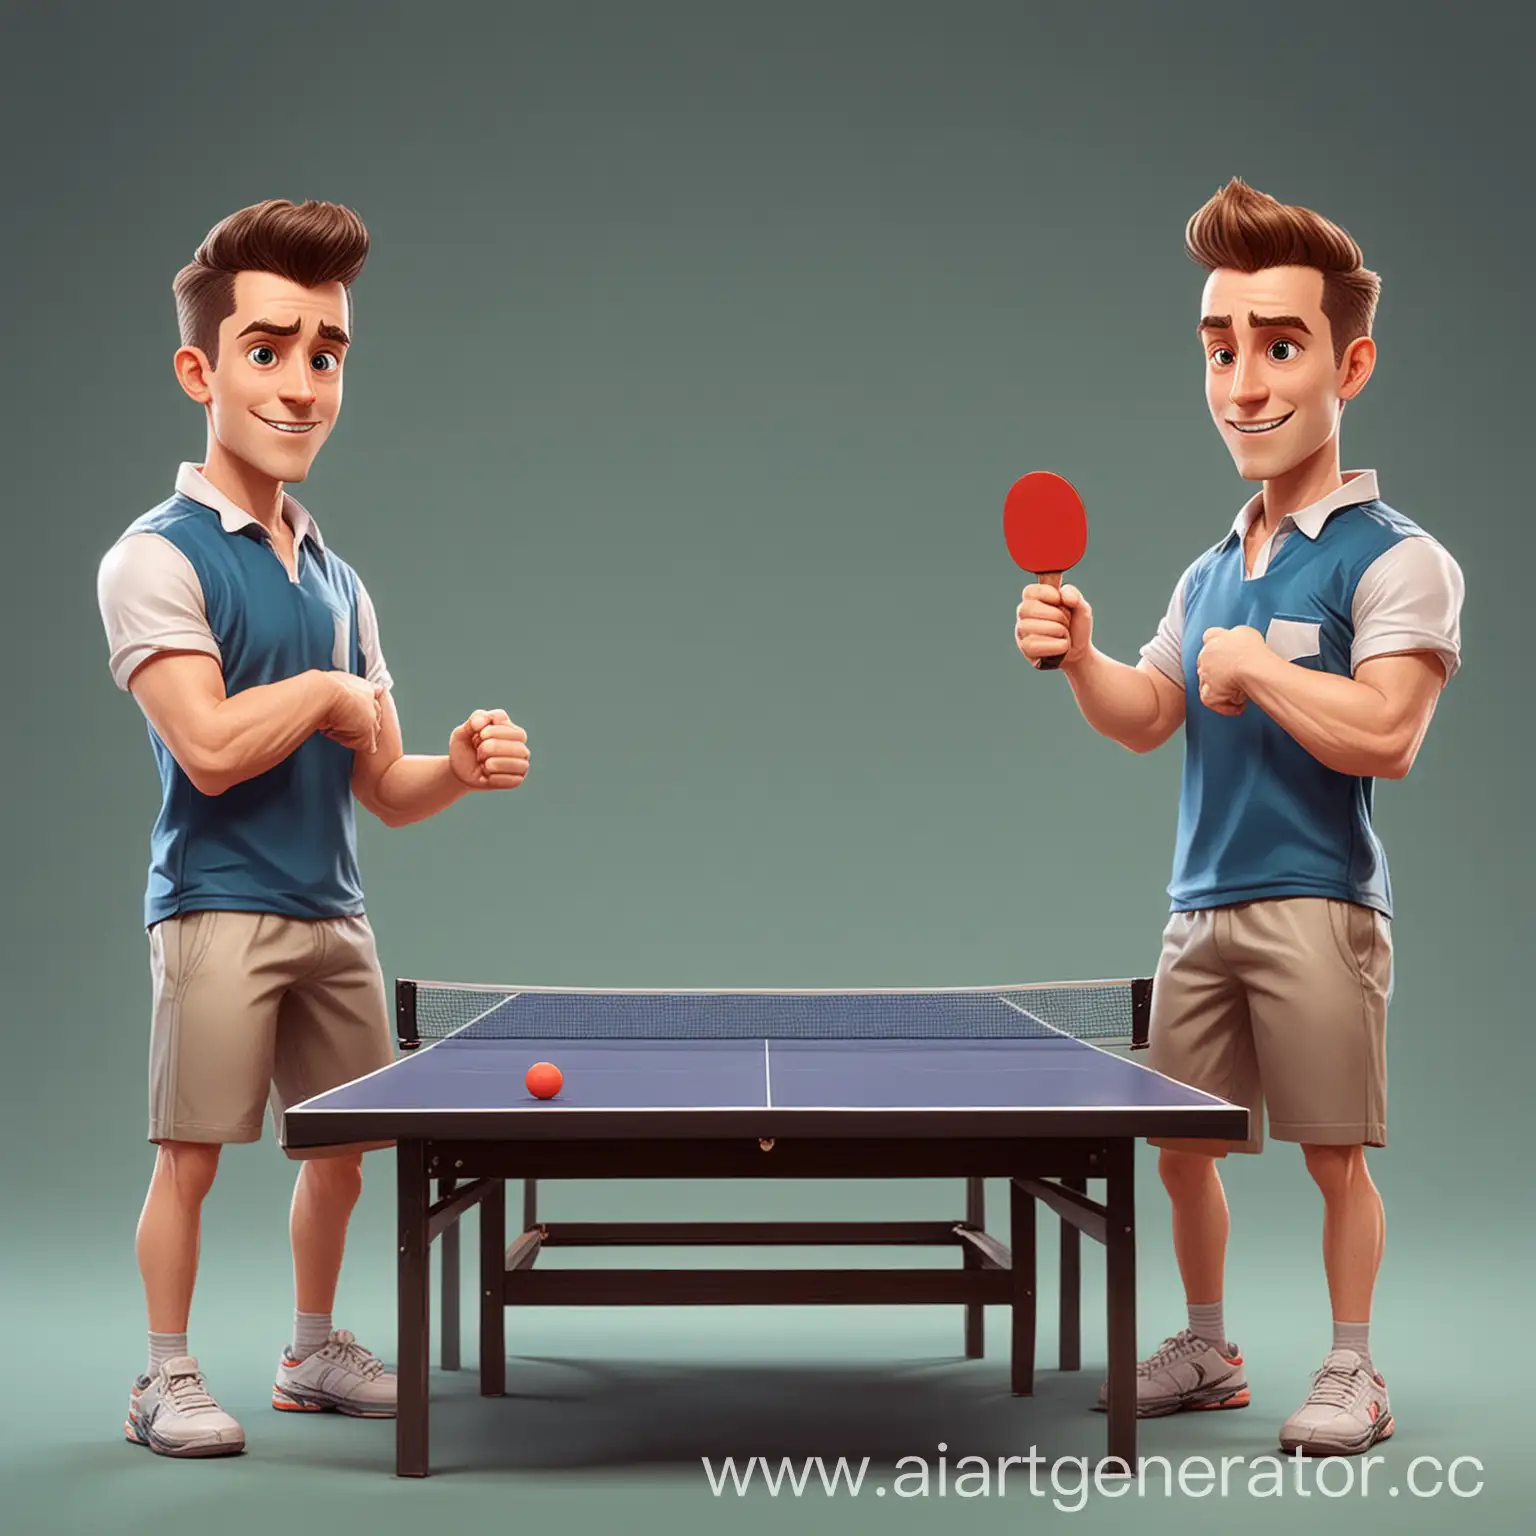 Dynamic-Cartoon-Men-Engage-in-Competitive-Table-Tennis-Match